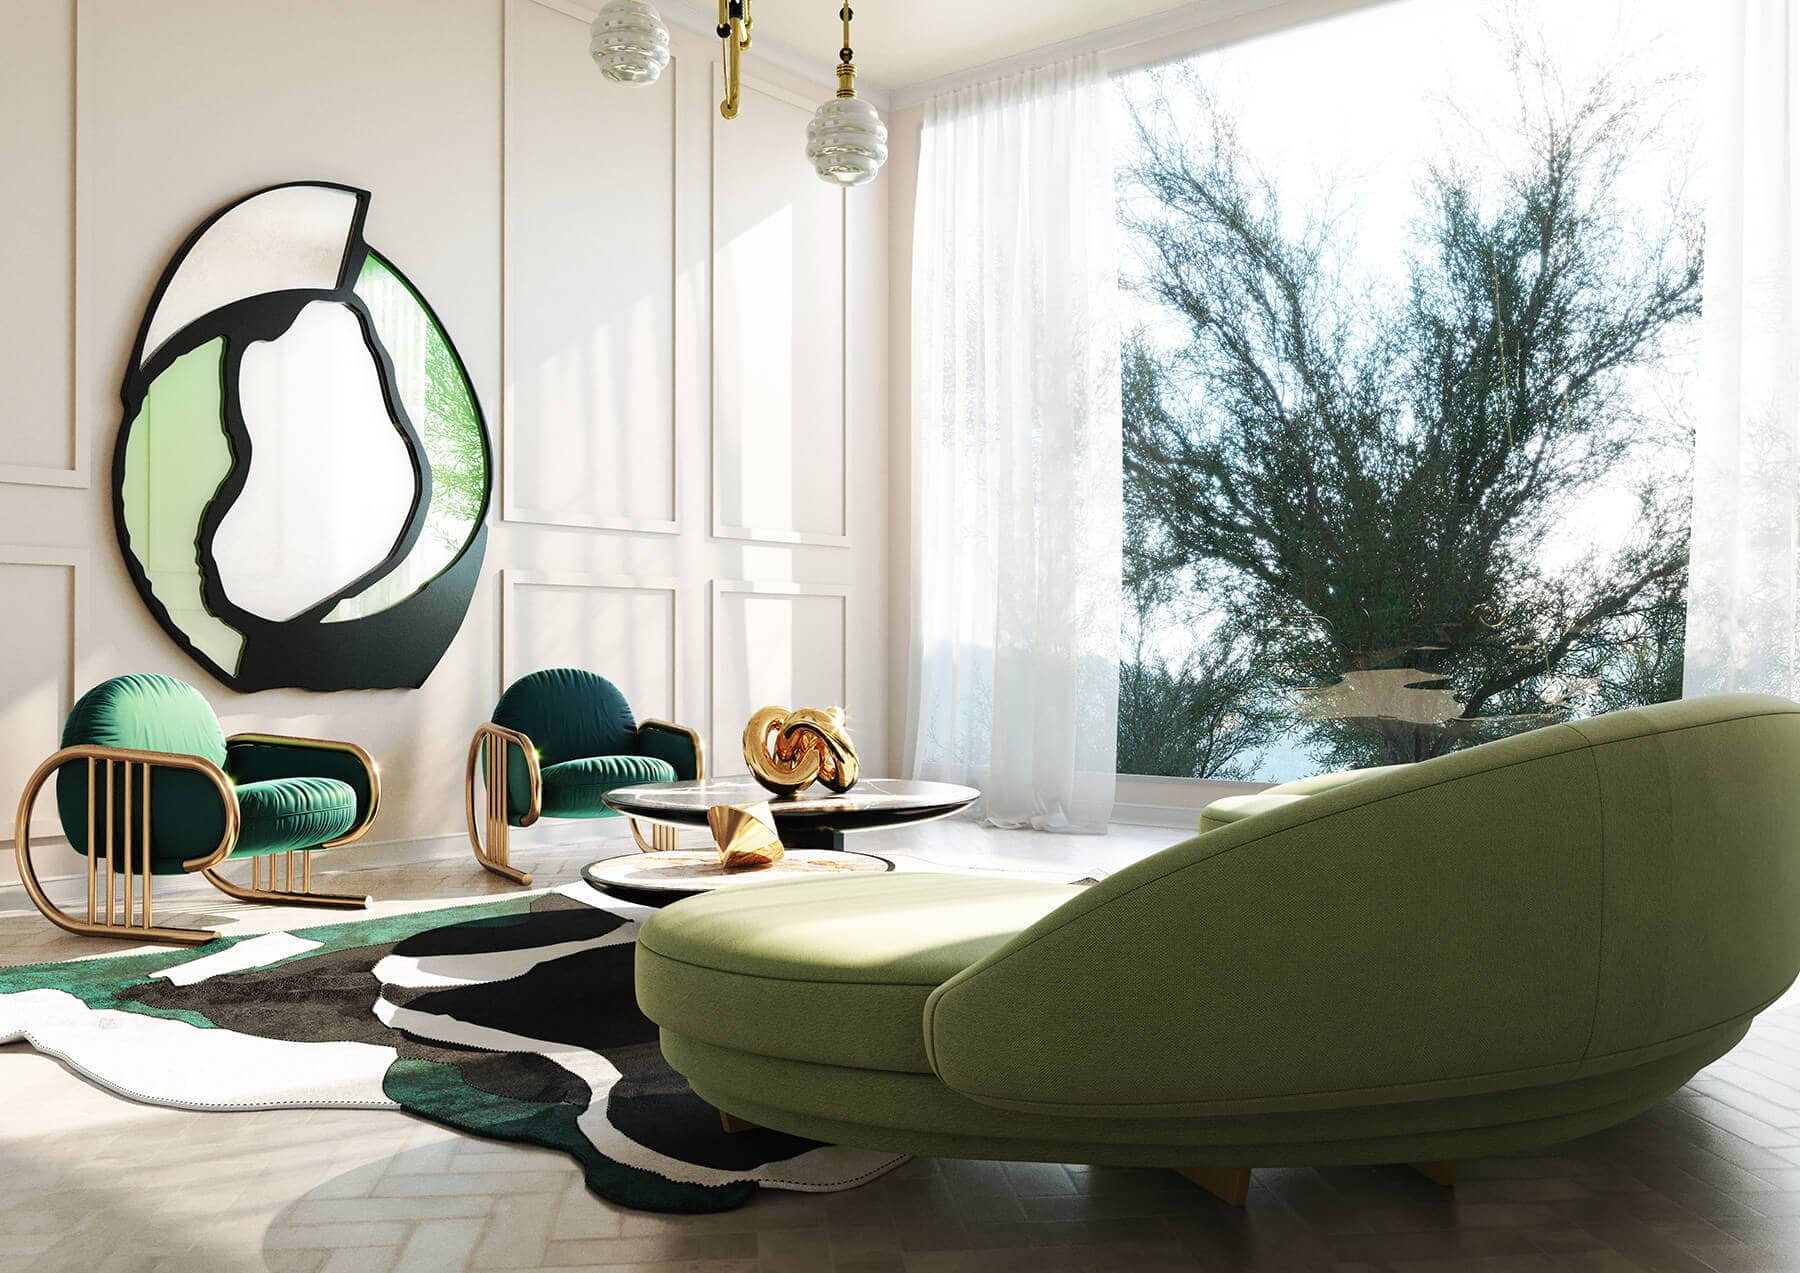 Royal Green Living Room is a remarkable contemporary interior design, luxurious and mysterious, unexpected, but confident.